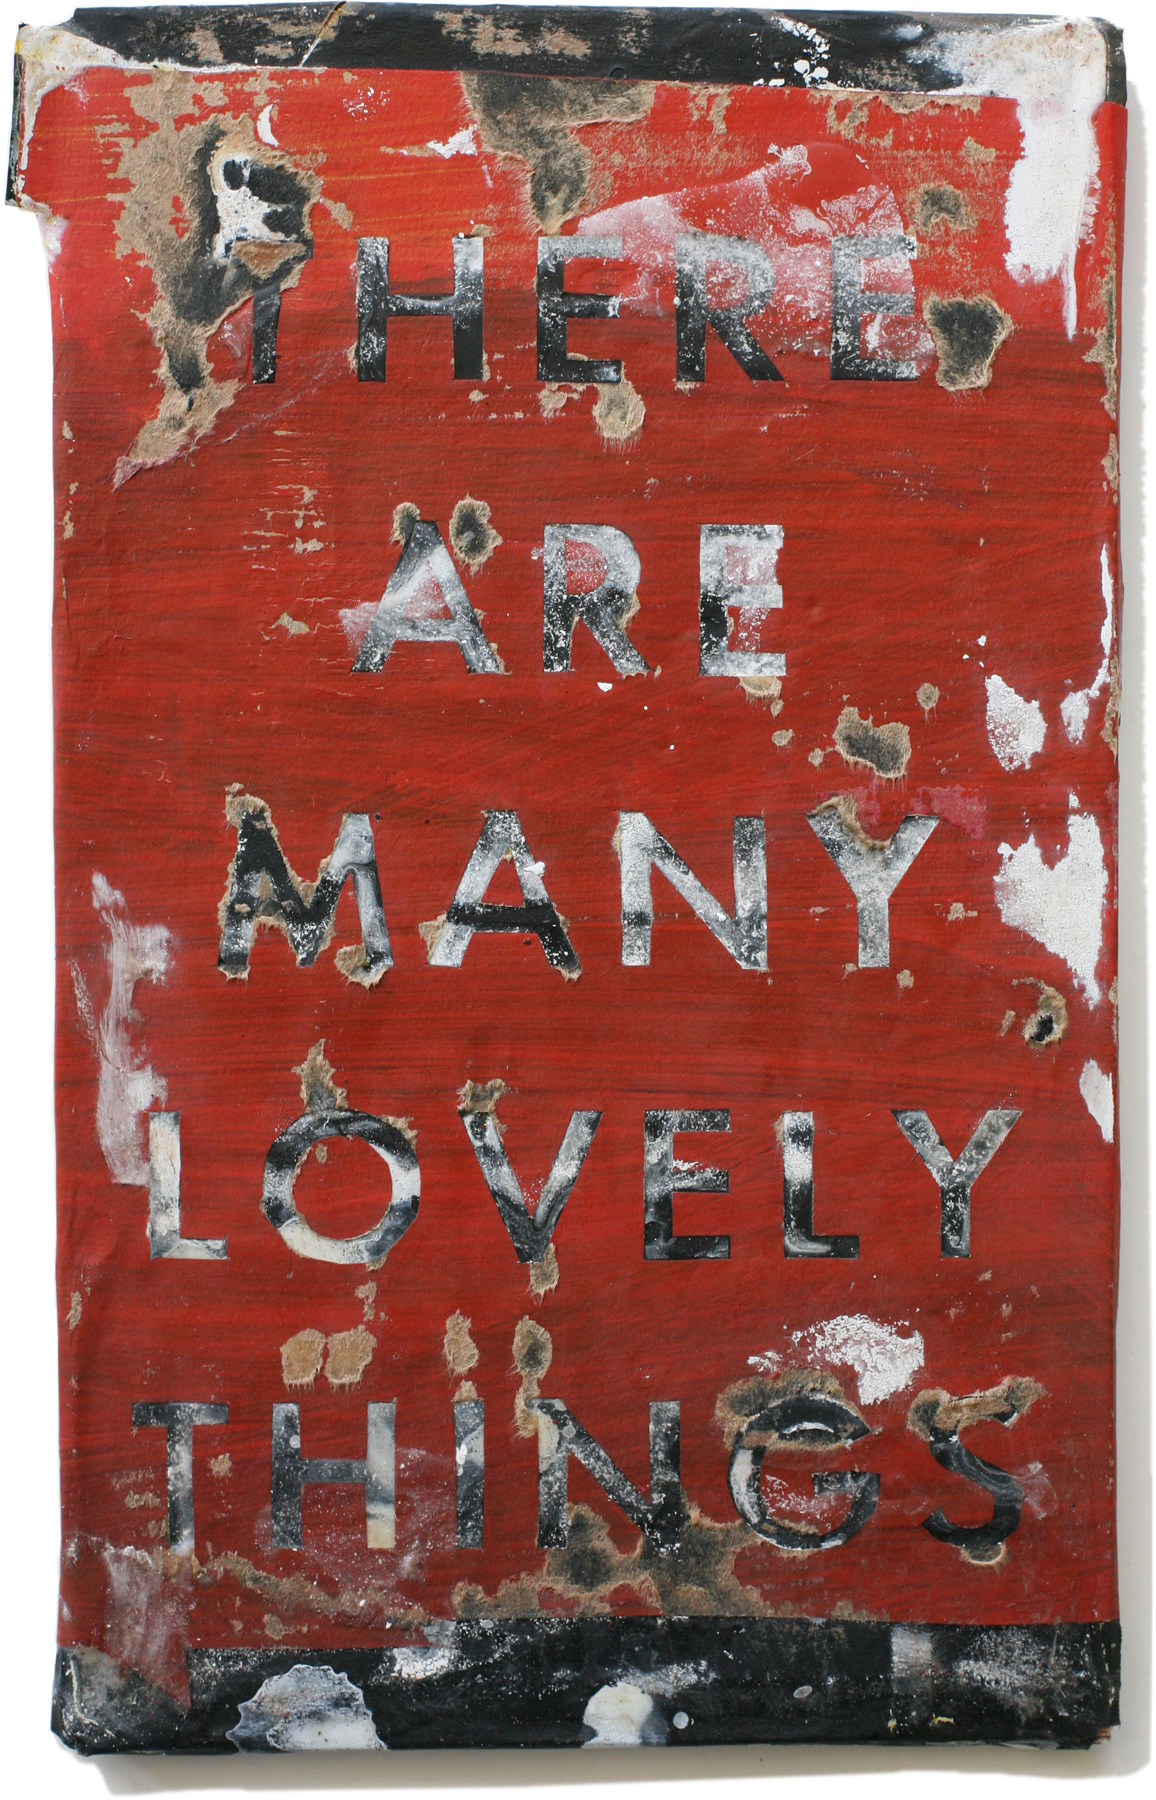 Lovely Things 33, 10" x 6", 2008-2010 (private collection)